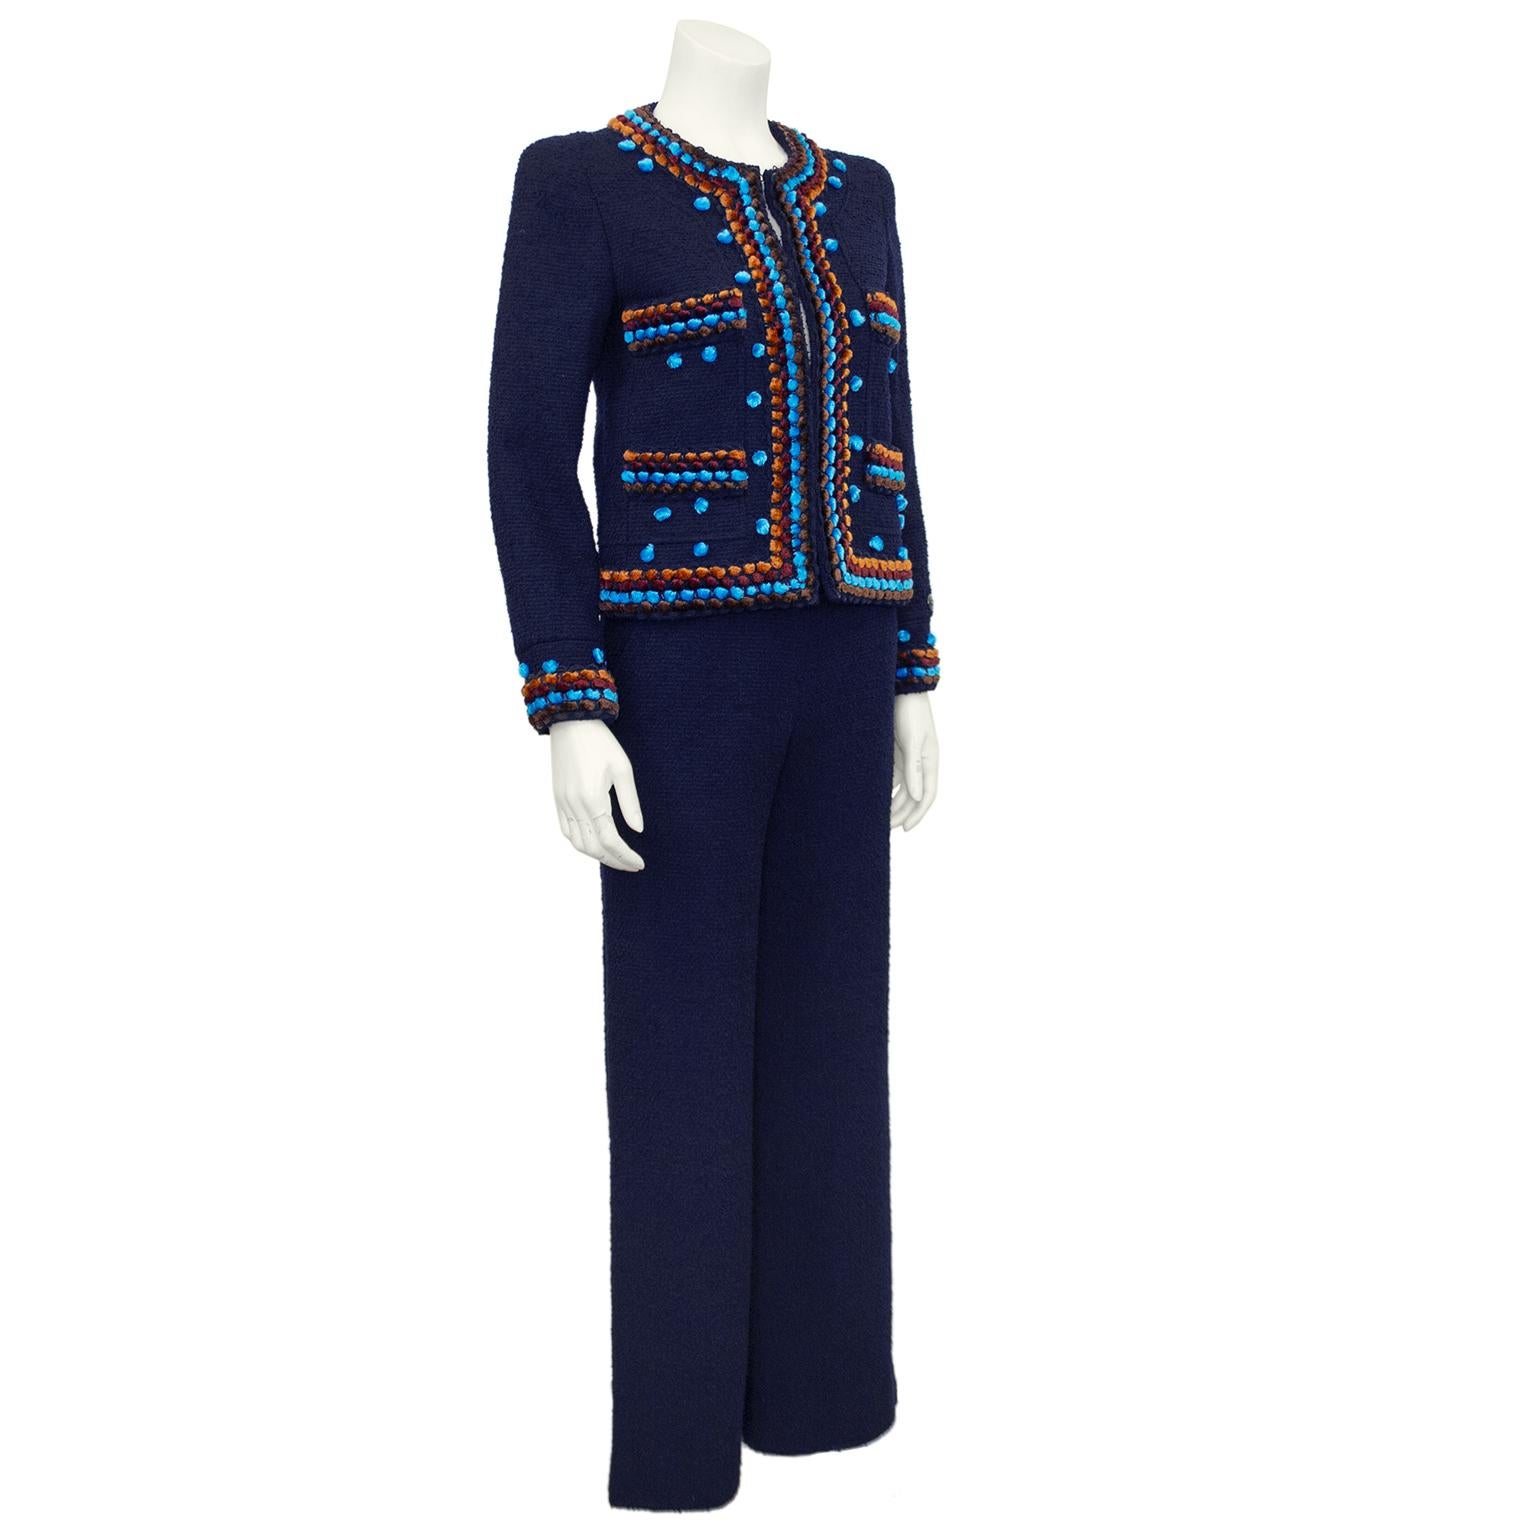 1997 Never worn Chanel Boutique navy pant suit. In excellent unused condition and currently on trend based on May 2022 Montecarlo Chanel runway show. Pant suits are back and this size 34 is perfect and timeless. Cropped, boxy jacket has tufts of